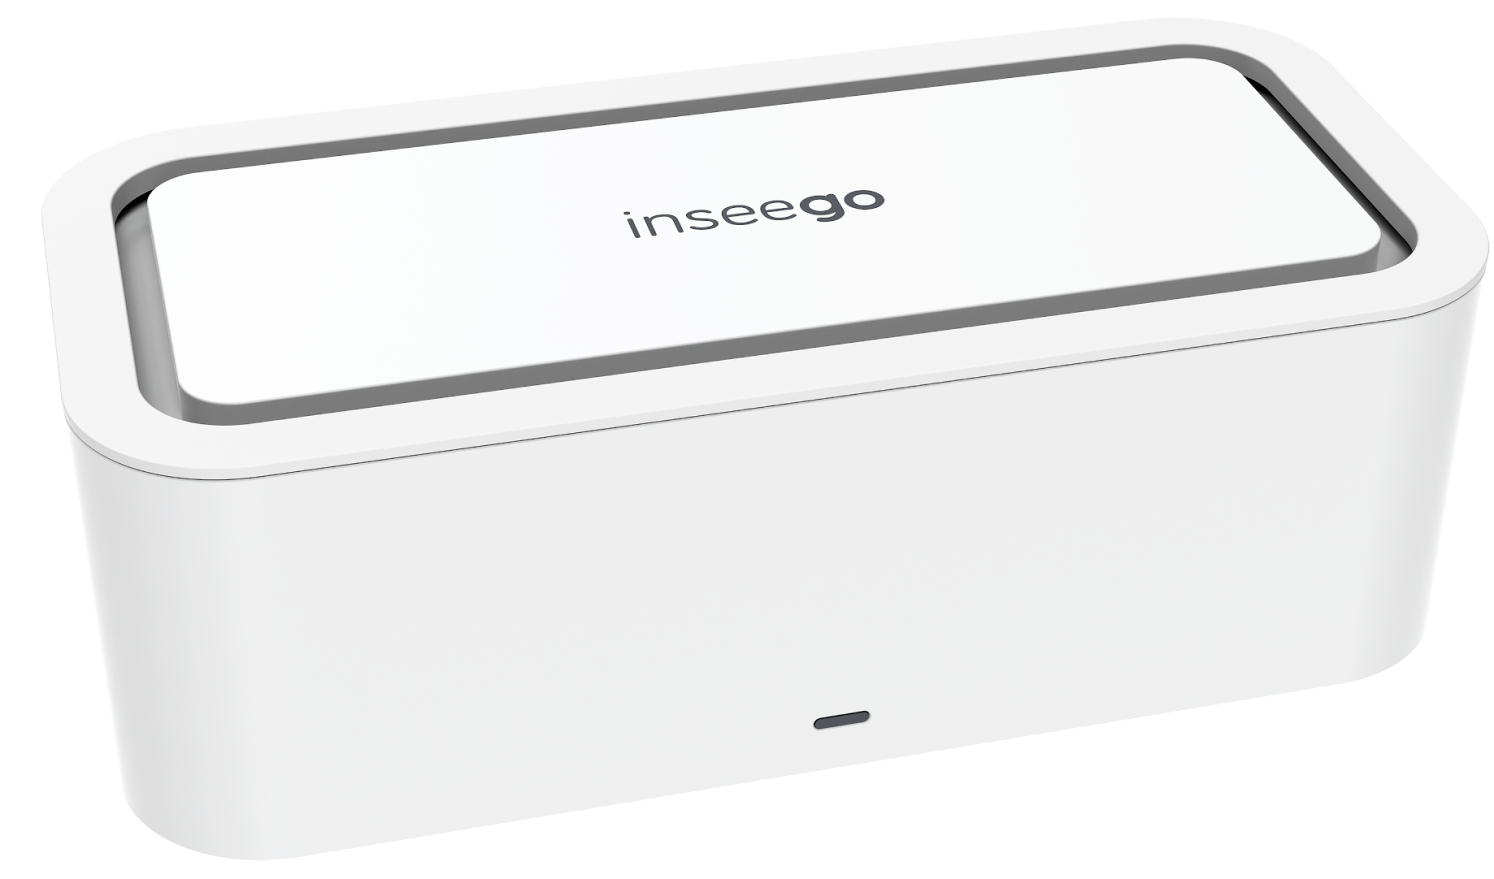 Inseego Wavemaker 5G indoor router FG2000